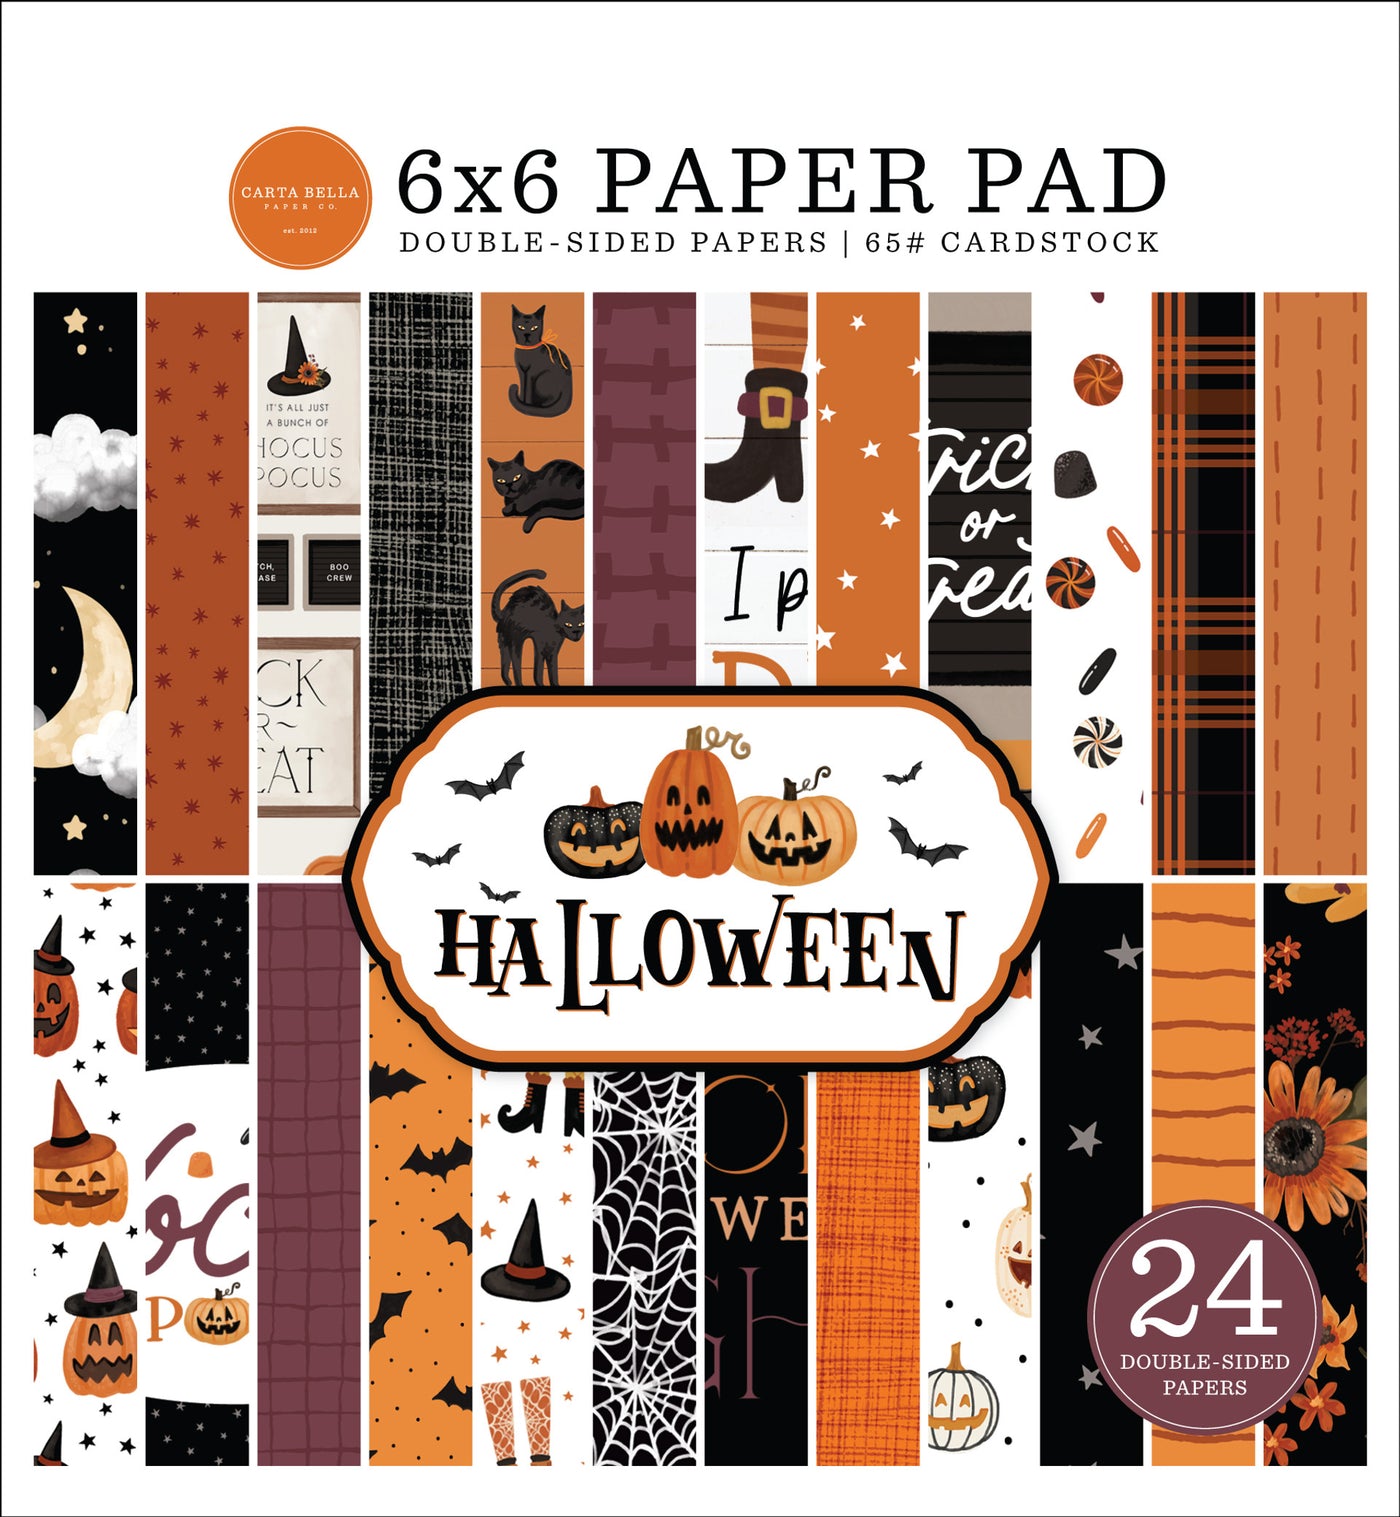 Halloween theme 6x6 pad with 24 double-sided pages for fun paper crafting. Printed pad coordinates with the Halloween Collection Kit also from Echo Park.